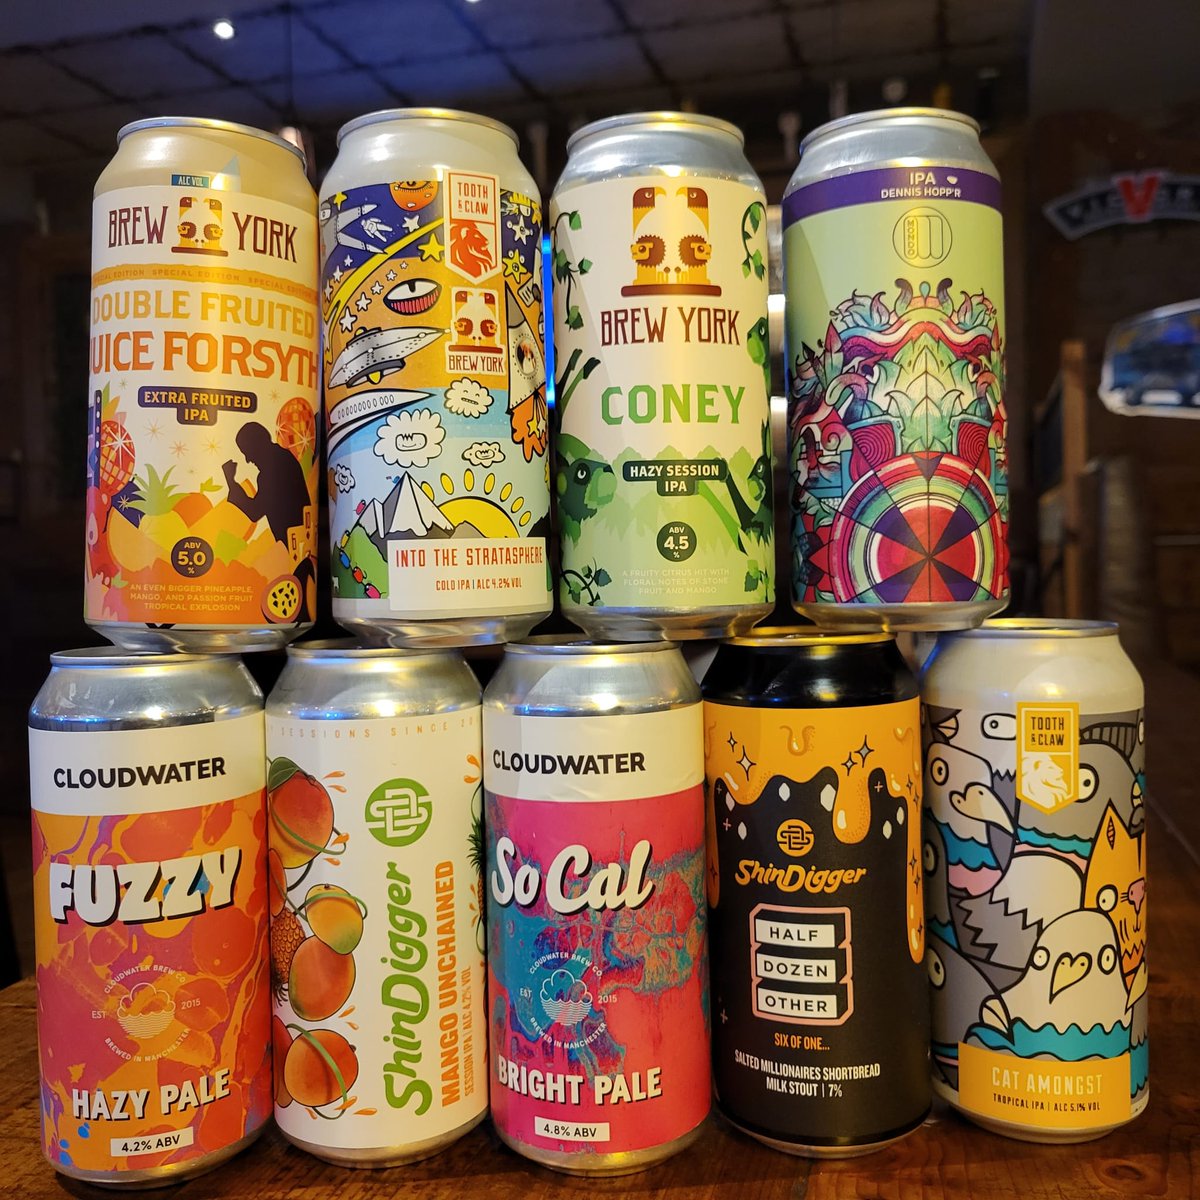 Have a selection this Sunday 🍻
3 for 2 on cans all day everyday!

#camerons #pints #lionspride #beerlovers #paleale #ale #pumpit #didsbury #beavertown #tinyrebel #cloudwater #oldmout #peroni #erdinger #3for2